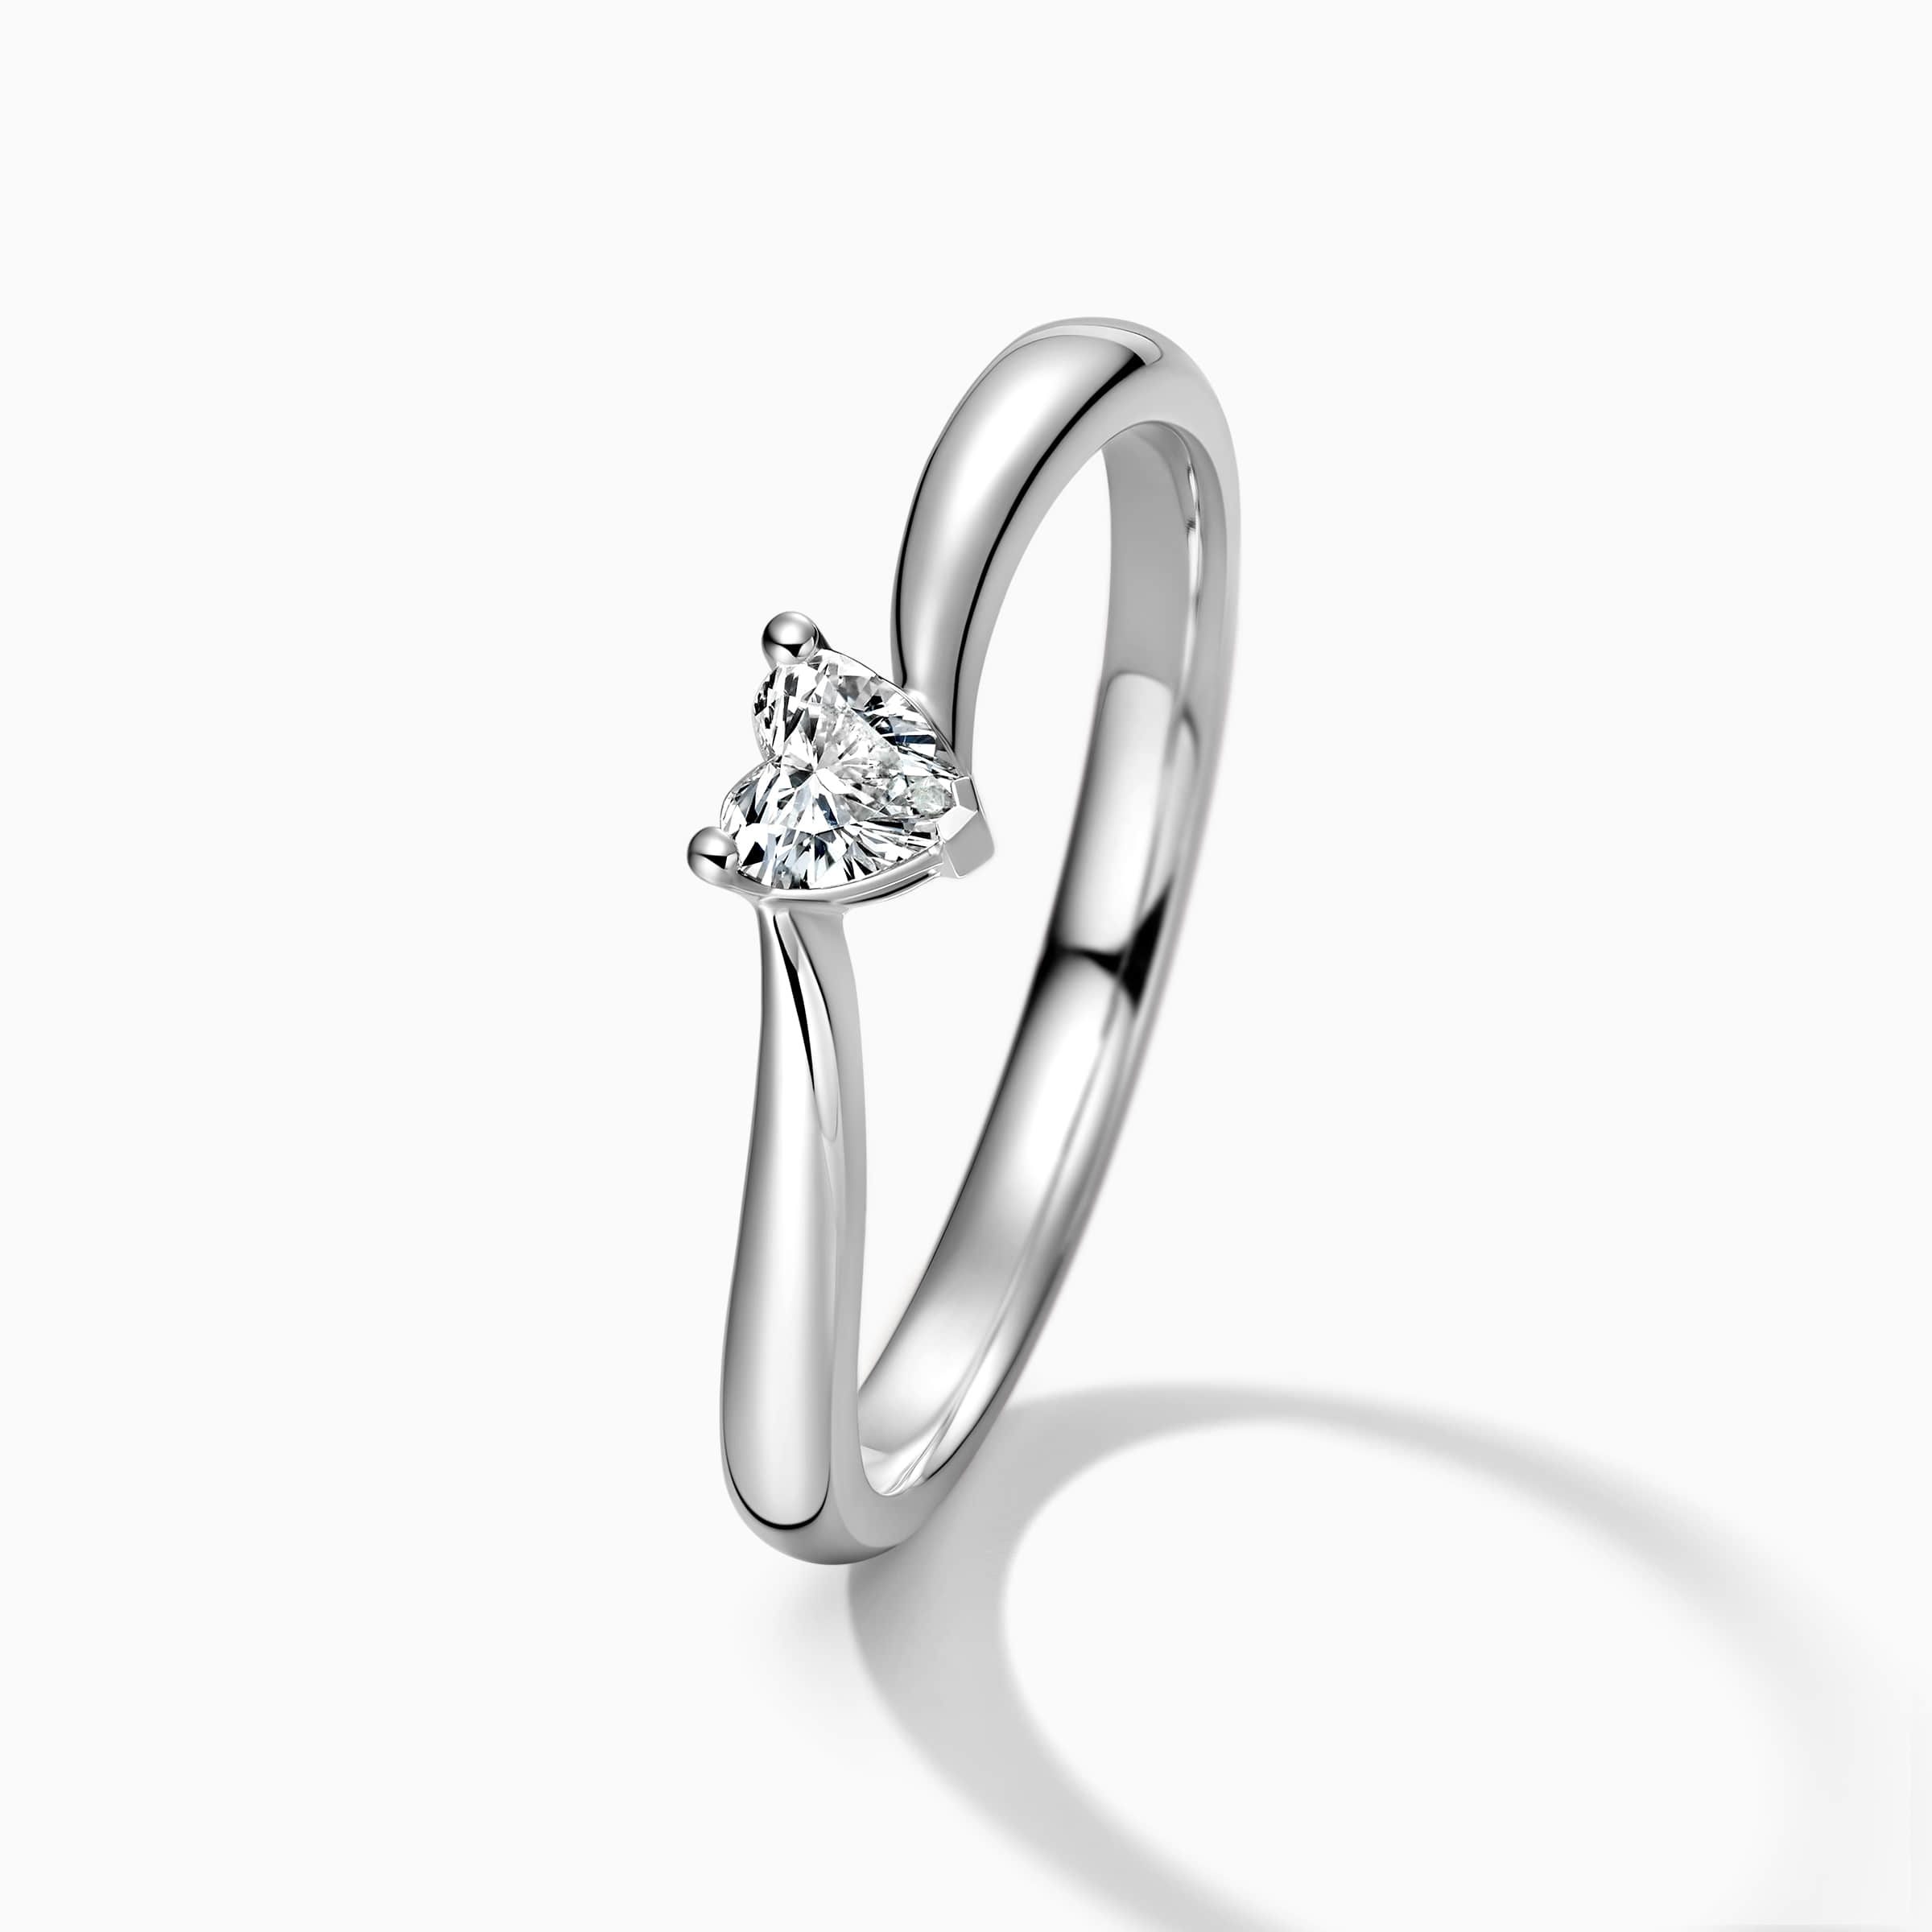 darry ring heart shaped solitaire engagement ring side view